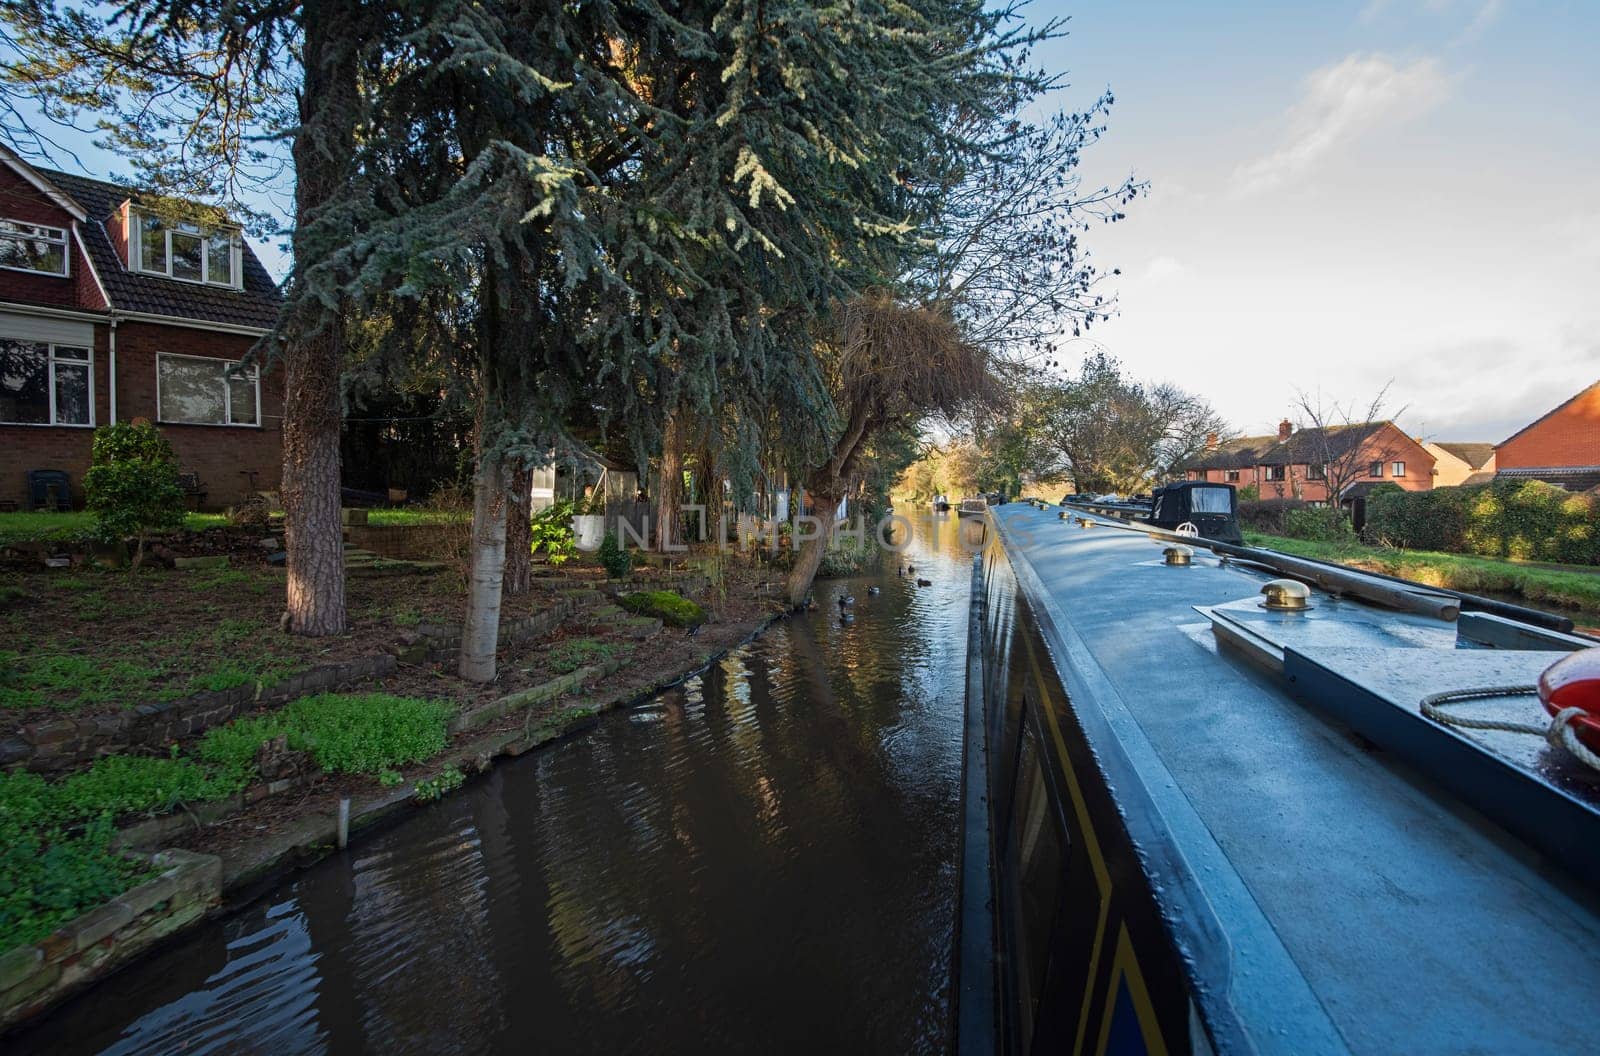 View from a narrowboat travelling in English urban countryside scenery on British waterway canal through village